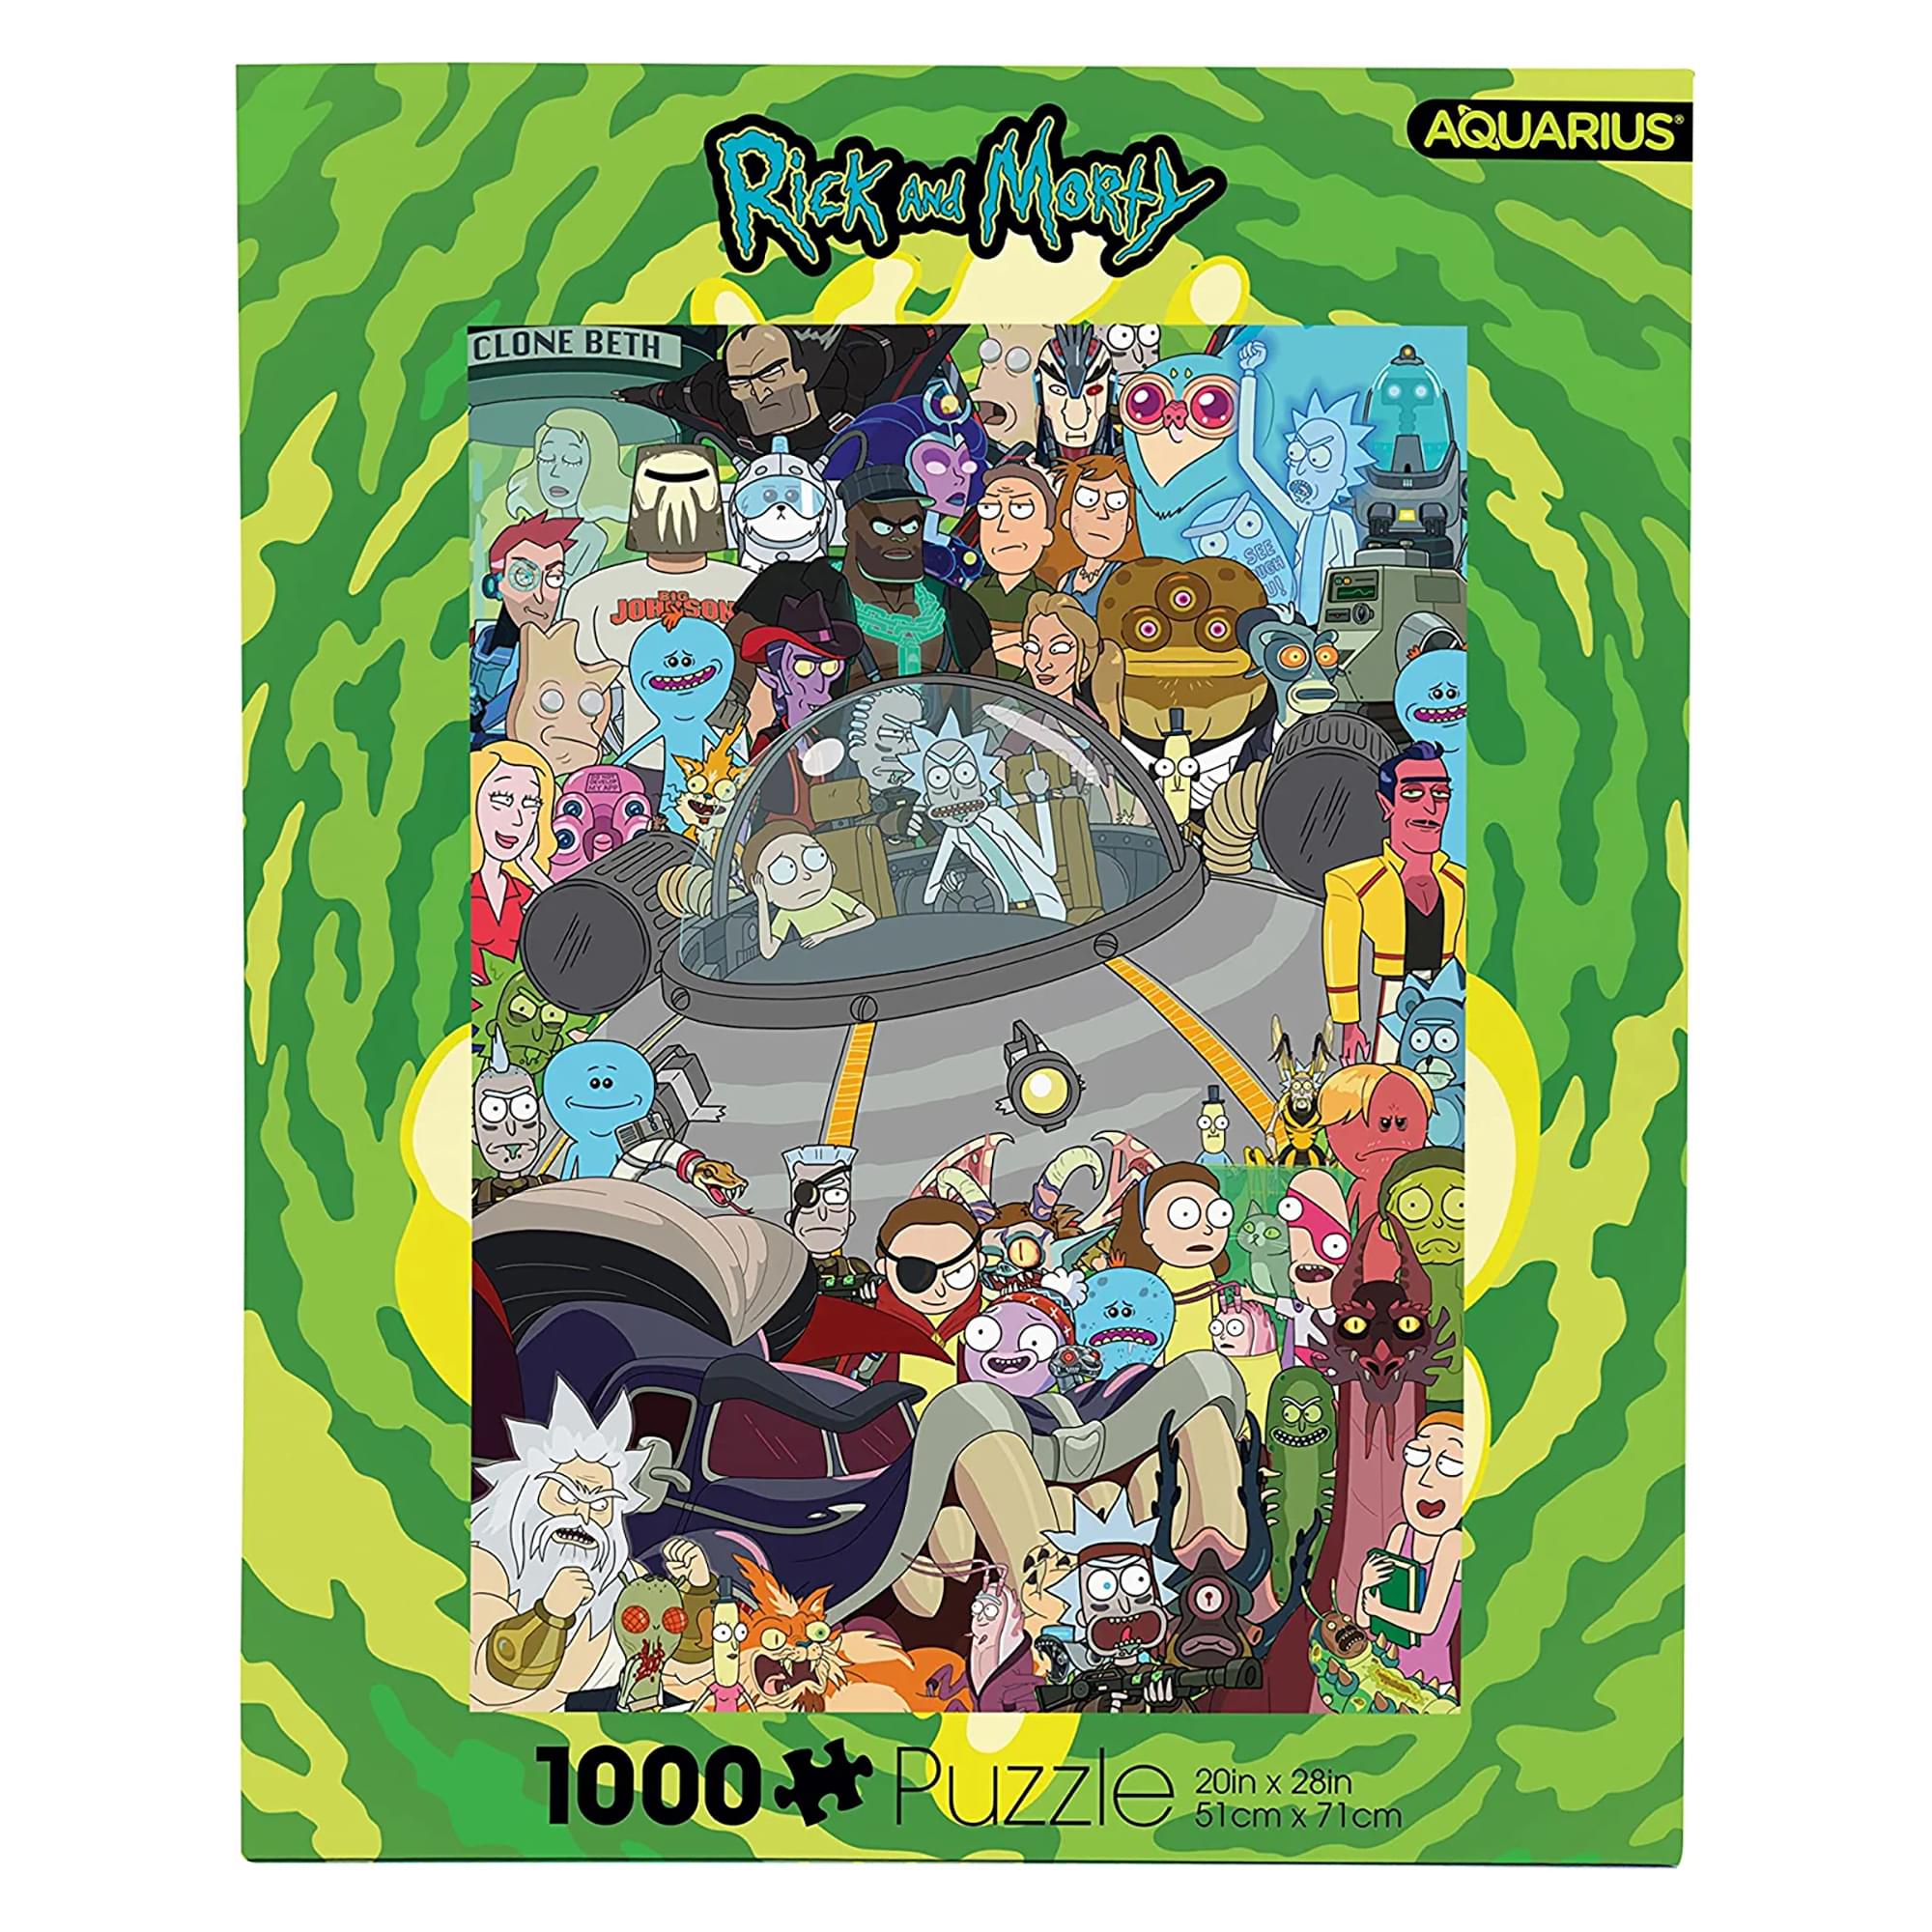  AQUARIUS Friends Collage Puzzle (1000 Piece Jigsaw Puzzle) -  Officially Licensed Friends TV Show Merchandise & Collectibles - Glare Free  - Precision Fit - 20 x 28 Inches : Toys & Games